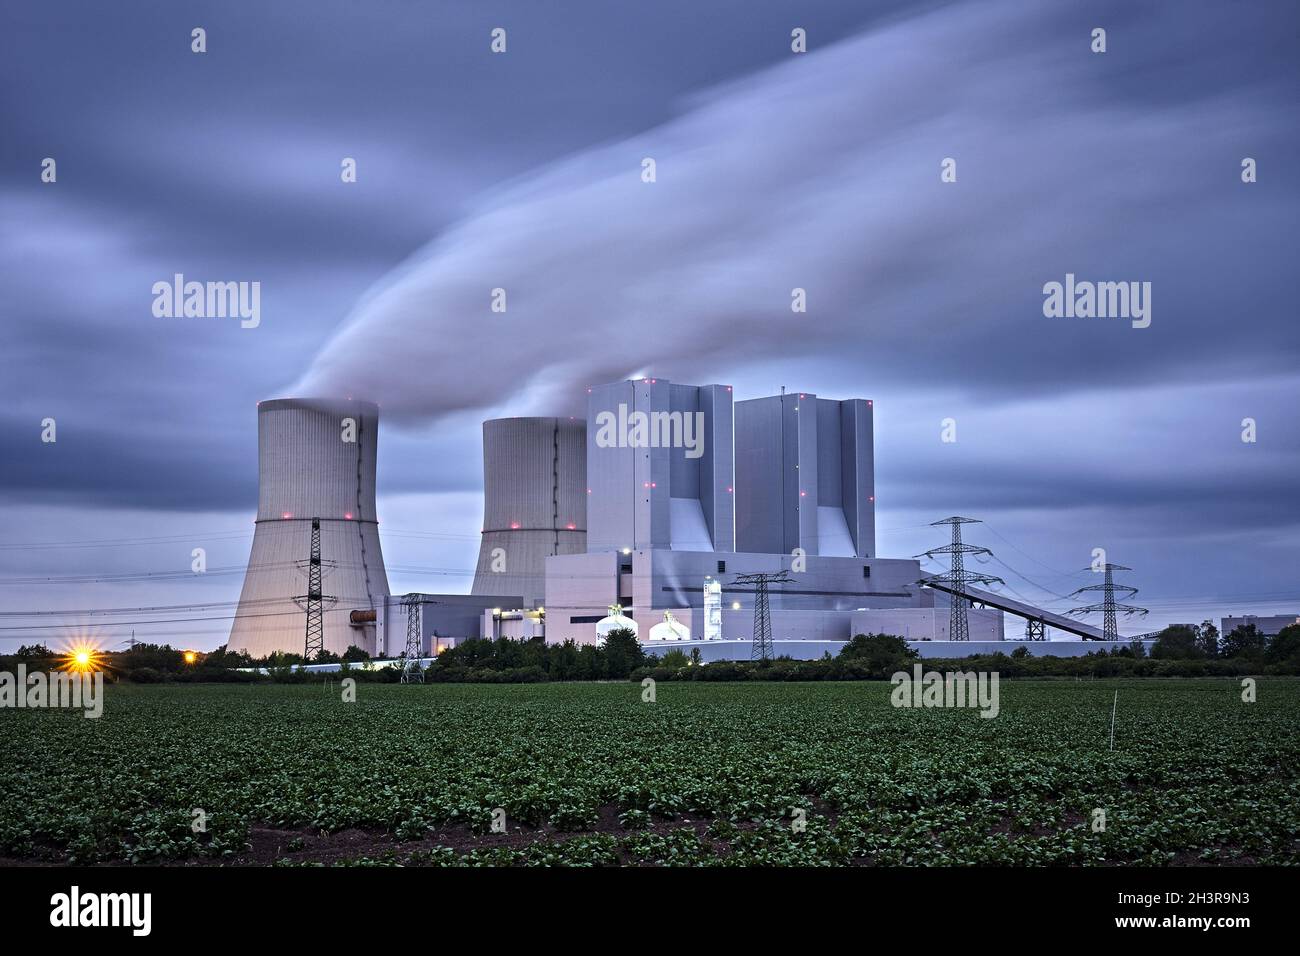 Lippendorf power plant owned by LEAG and EnBW. Stock Photo